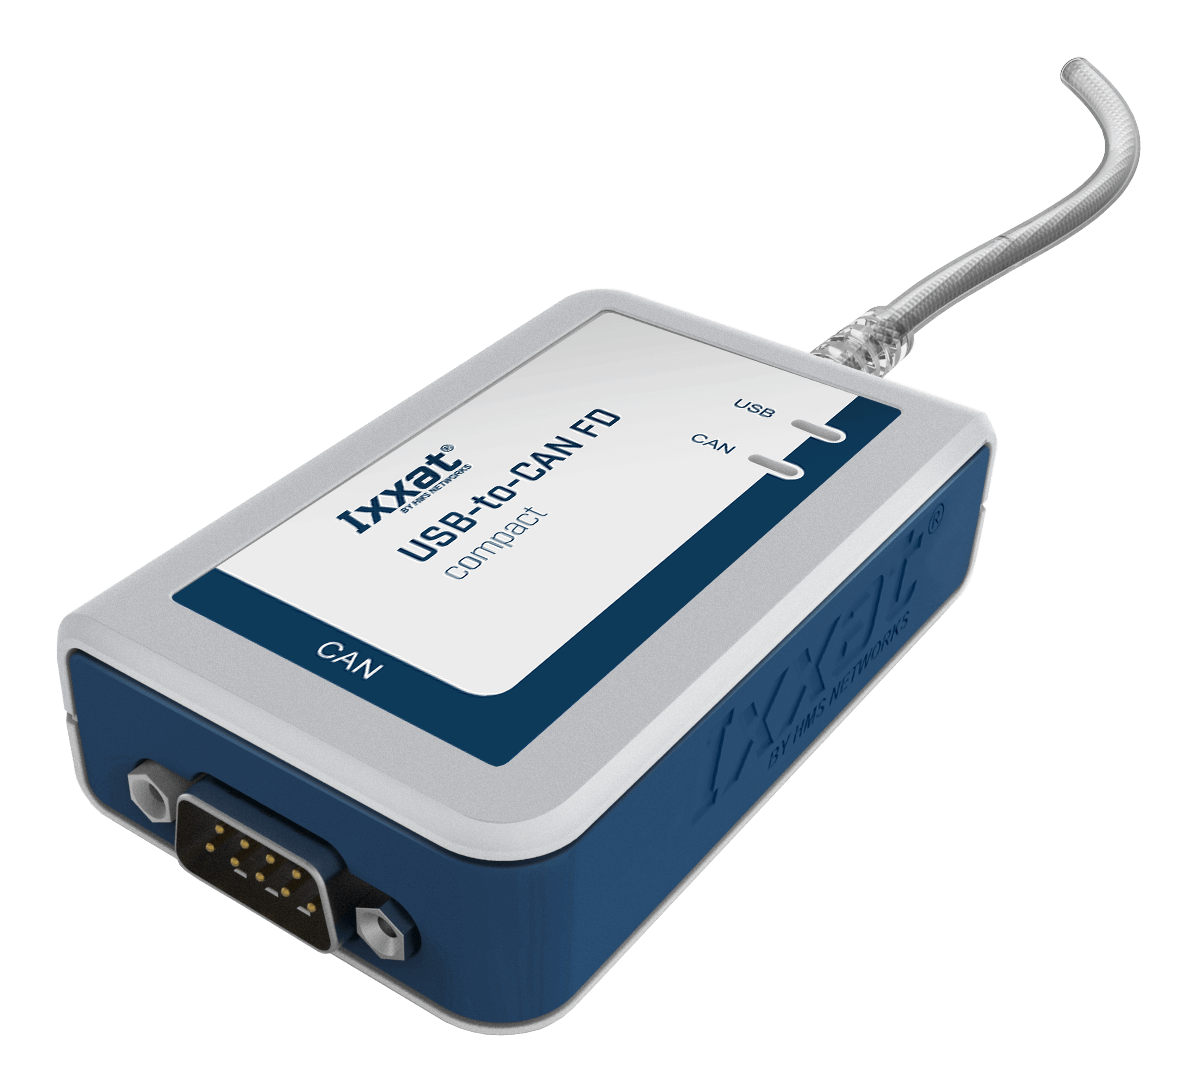 Ixxat USB Ethernet Adapter USB 2.0 USB A to D-sub, 9 Pin